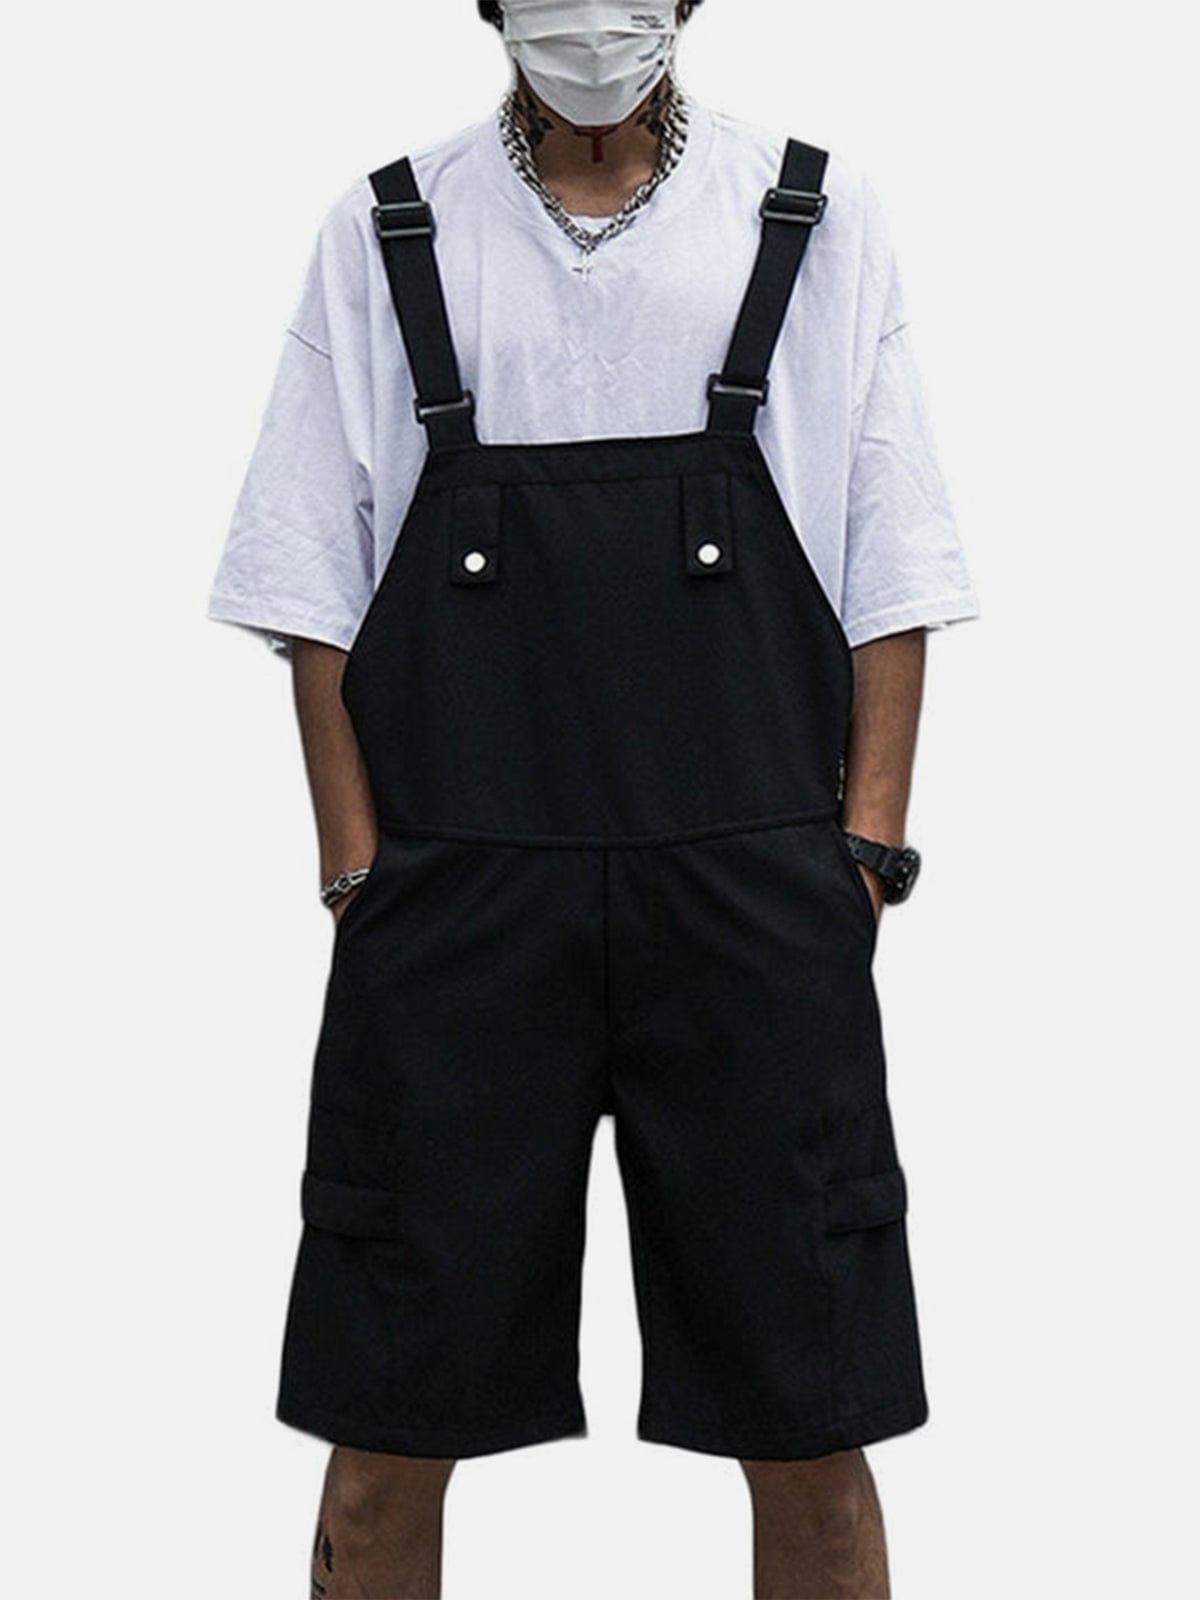 Functional Dark Solid Color Cotton overalls Streetwear Brand Techwear Combat Tactical YUGEN THEORY